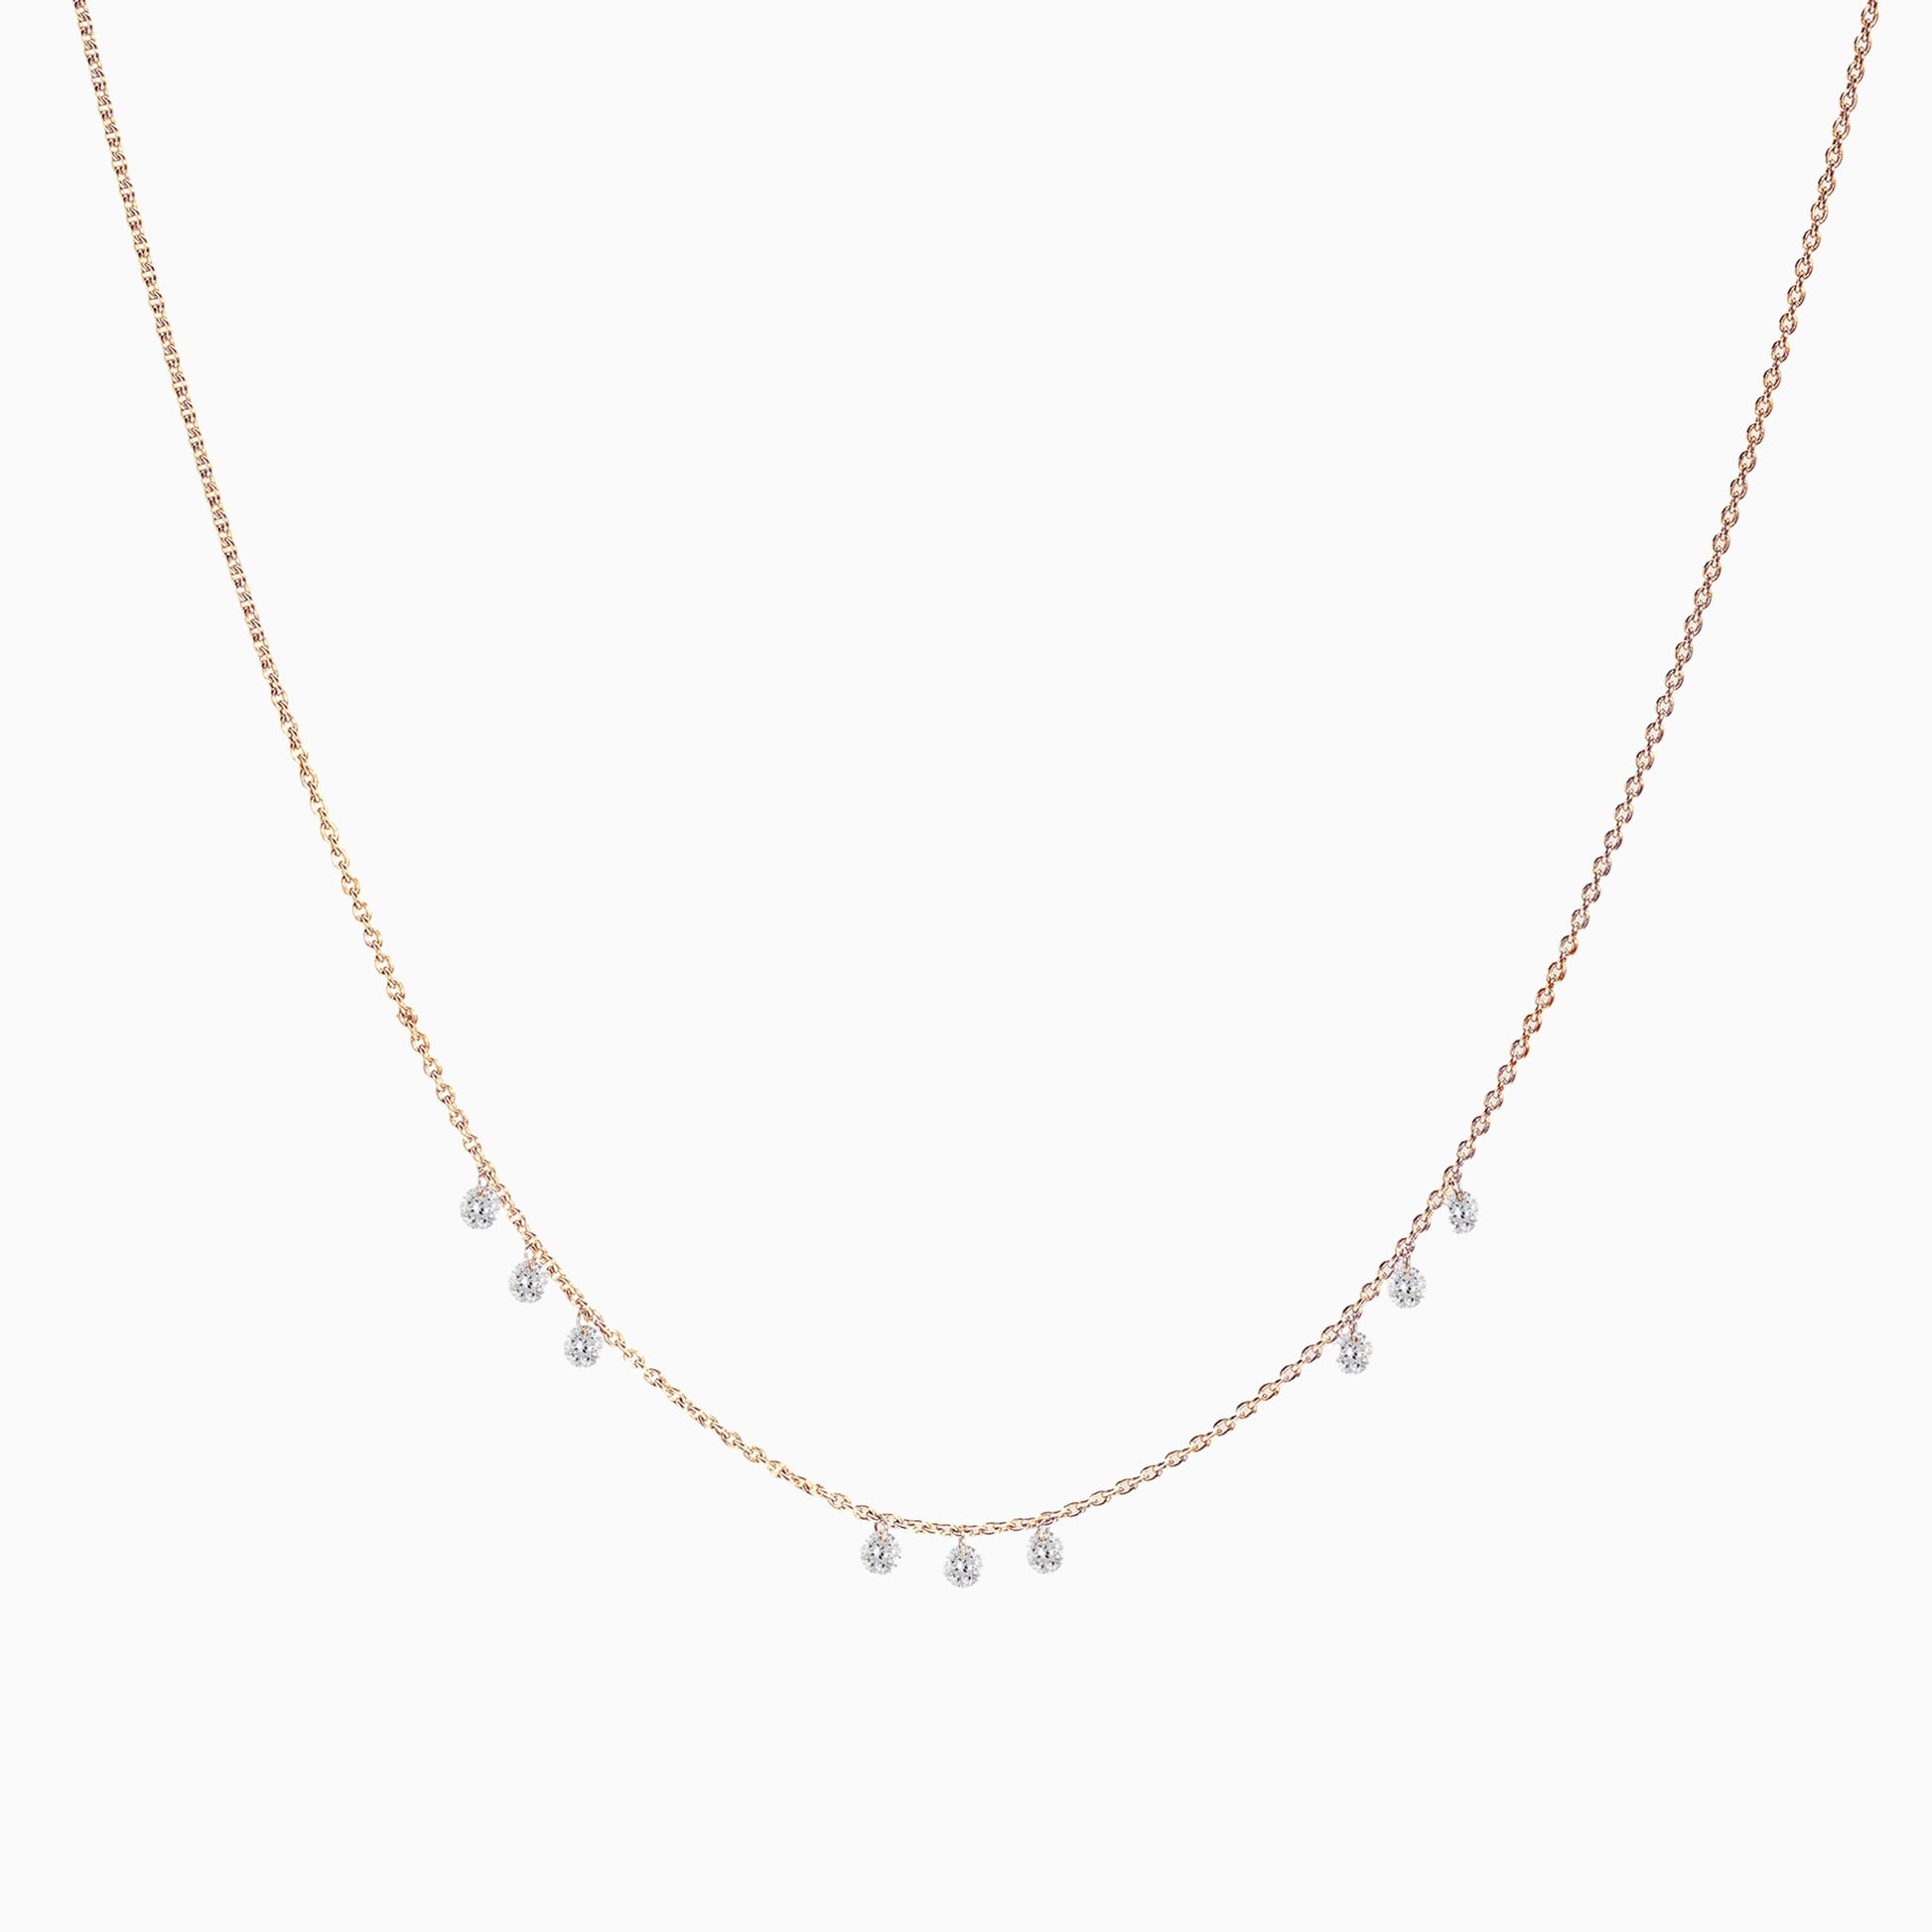 Floating Nine Diamonds Necklace in Rose Gold on a white background